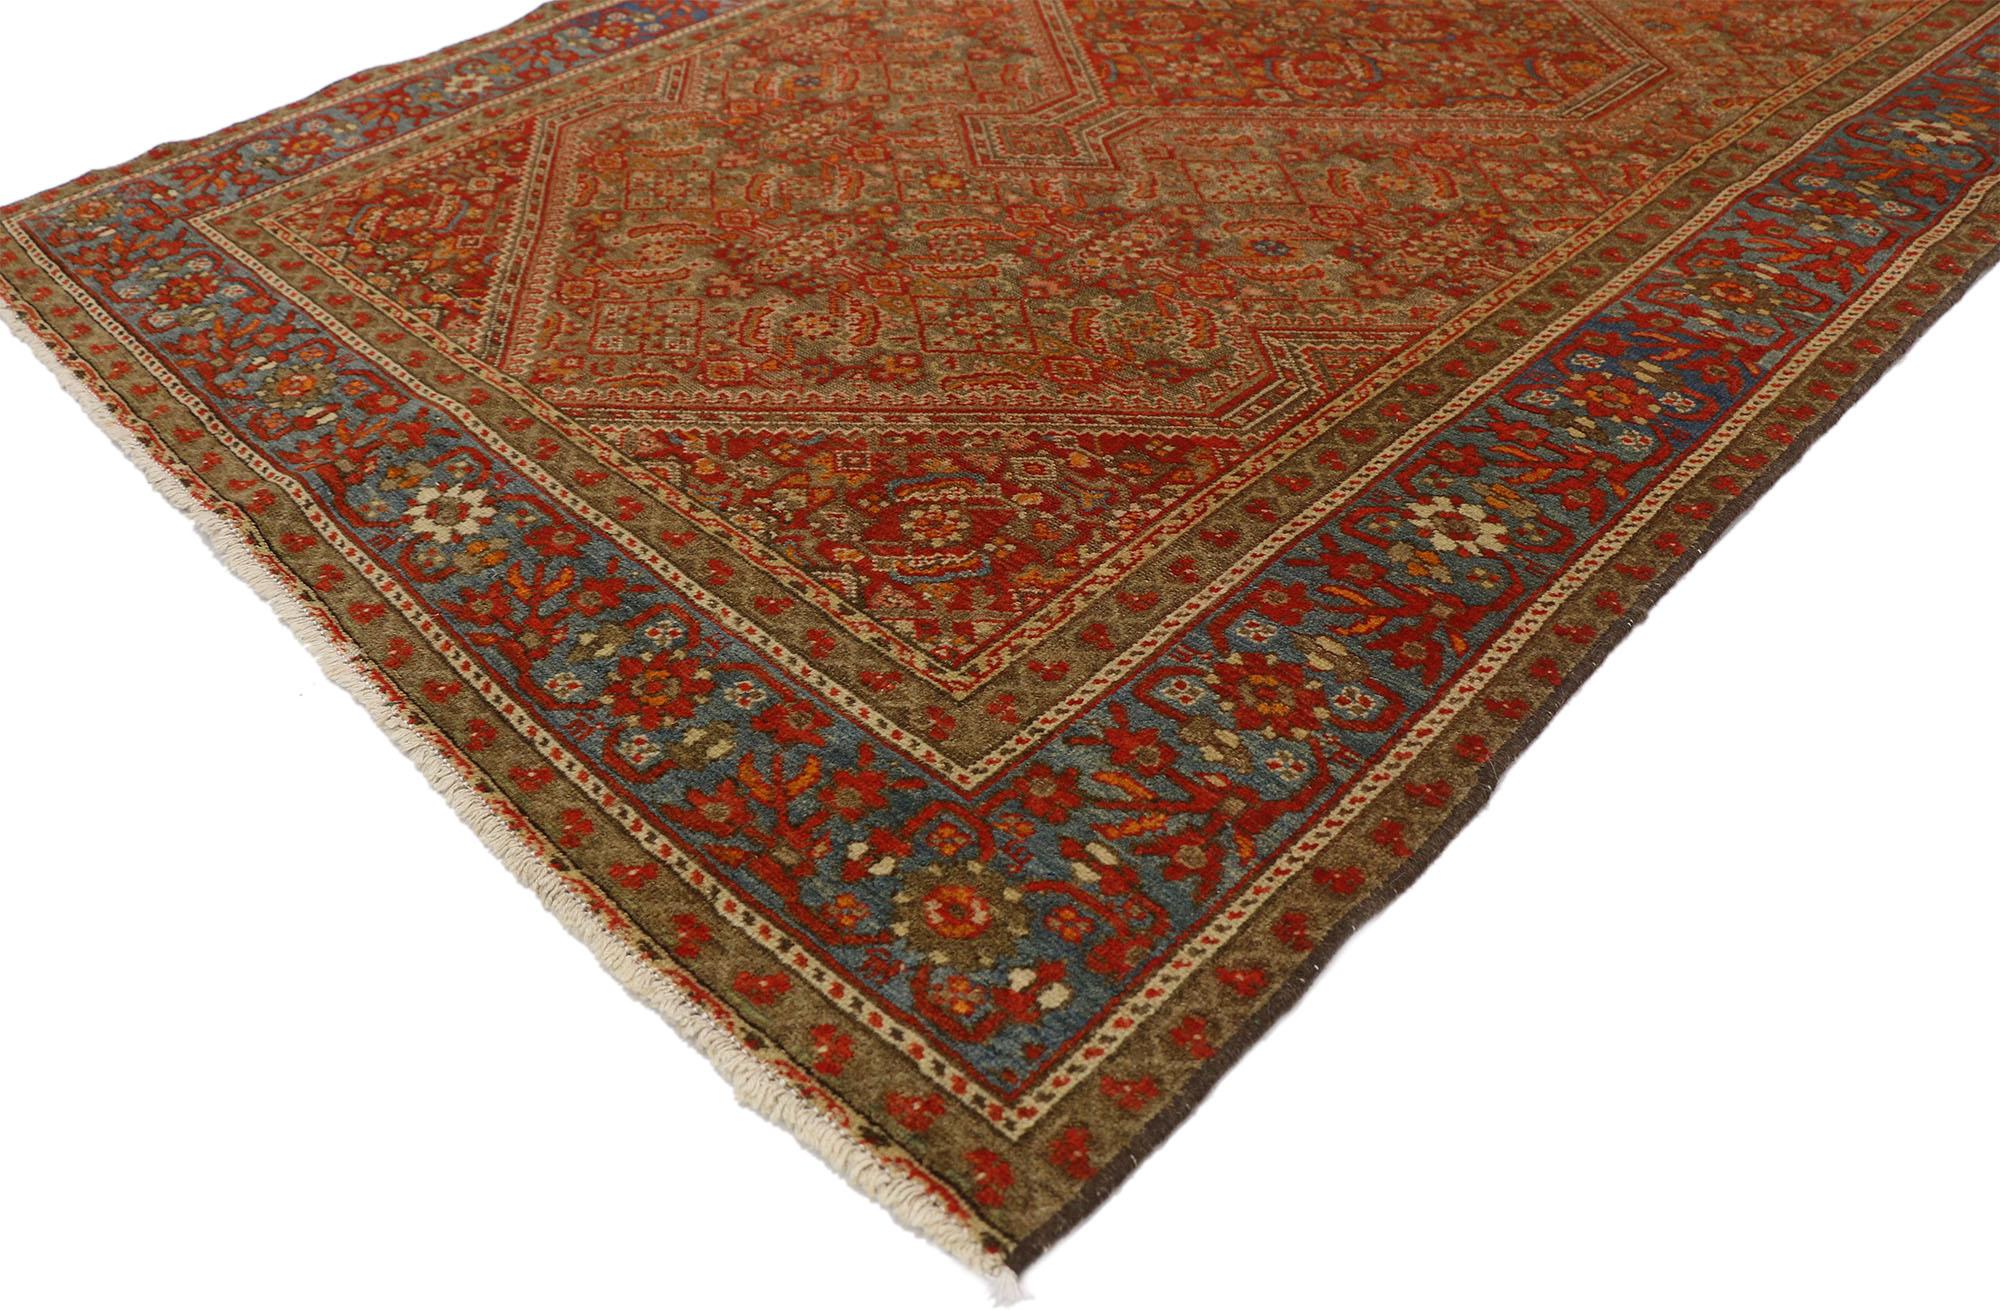 74649 antique Persian Mishan Malayer rug with Northwestern Arts & Crafts style 04'00 x 06'08. With its geometric pattern and rich colors, this hand knotted wool antique Persian Malayer was woven in the village of Mishan and considered to be